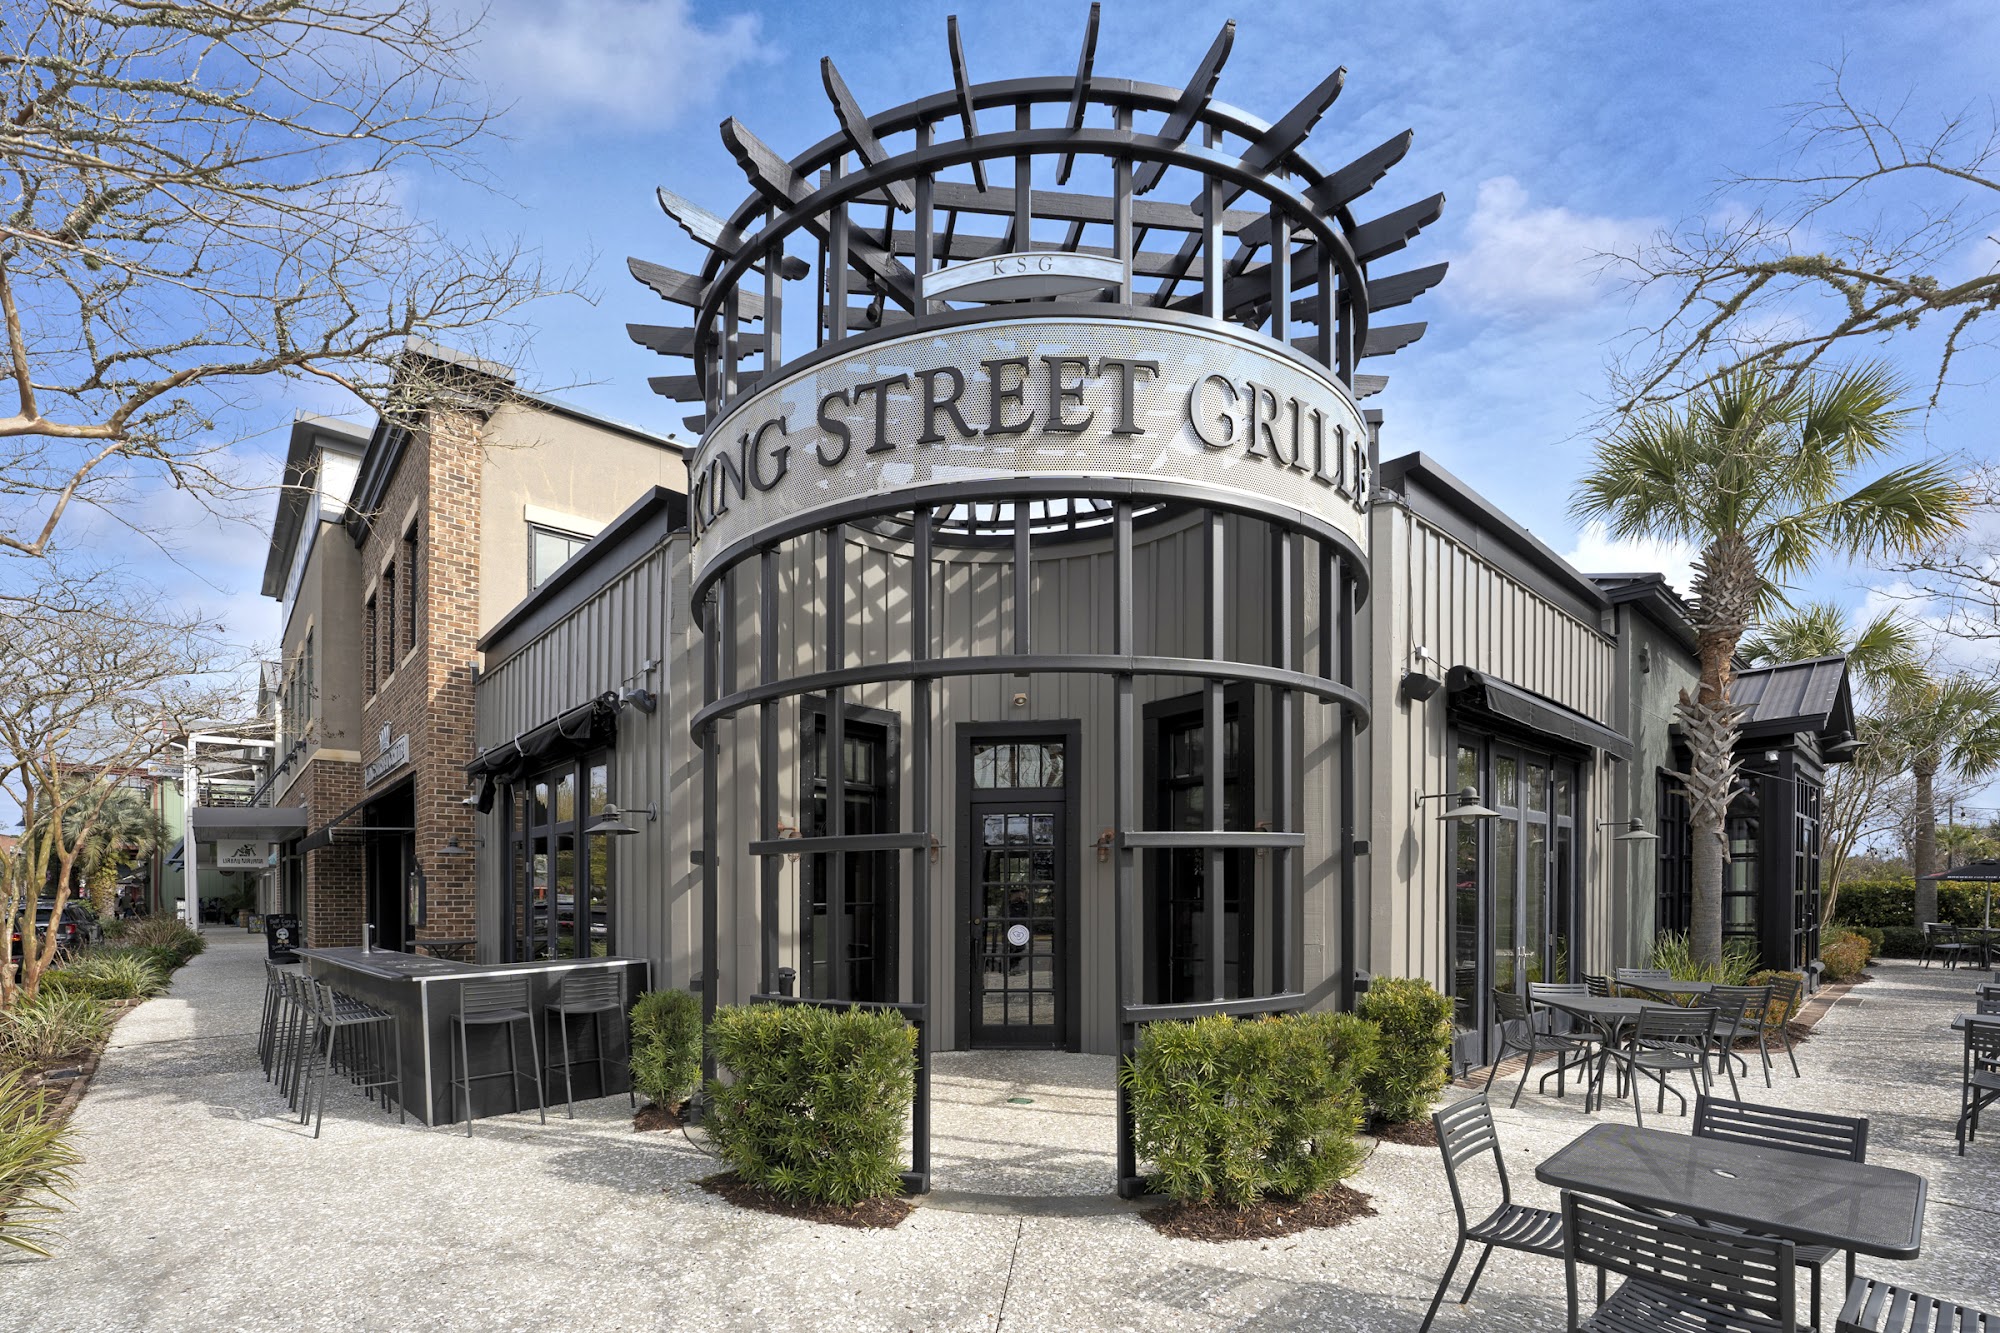 King Street Grille